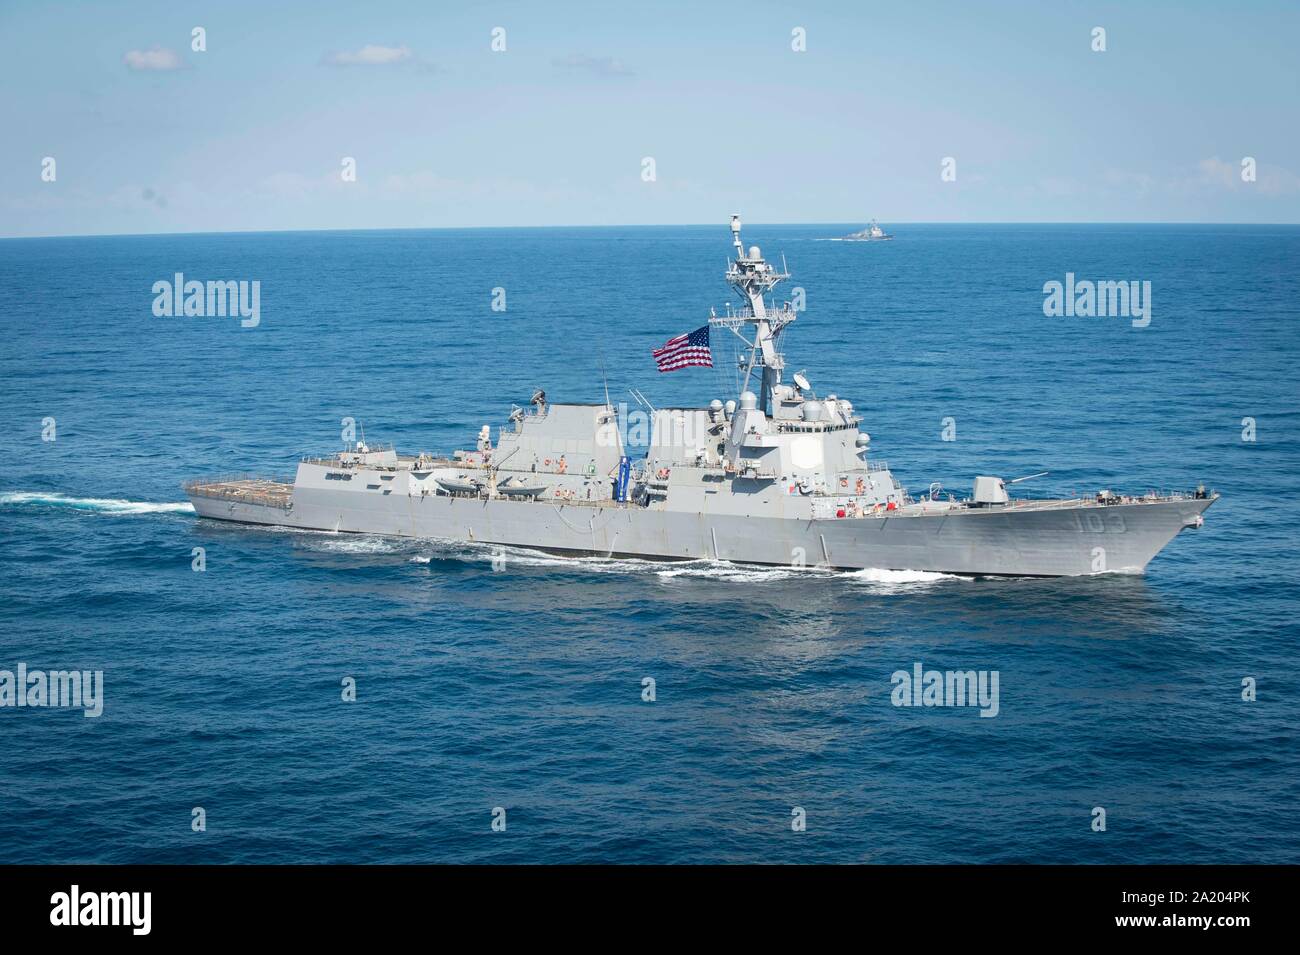 190928-N-QD512-1252  ATLANTIC OCEAN (Sept. 28, 2019) The guided-missile destroyer USS Truxtun (DDG 103) transits the Atlantic Ocean during a photo exercise with the aircraft carrier USS Dwight D. Eisenhower to conclude Tailored Ship's Training Availability (TSTA) and Final Evaluation Problem (FEP) as part of the basic phase of the Optimized Fleet Response Plan. (U.S. Navy photo by Mass Communication Specialist 3rd Class Kaleb J. Sarten) Stock Photo